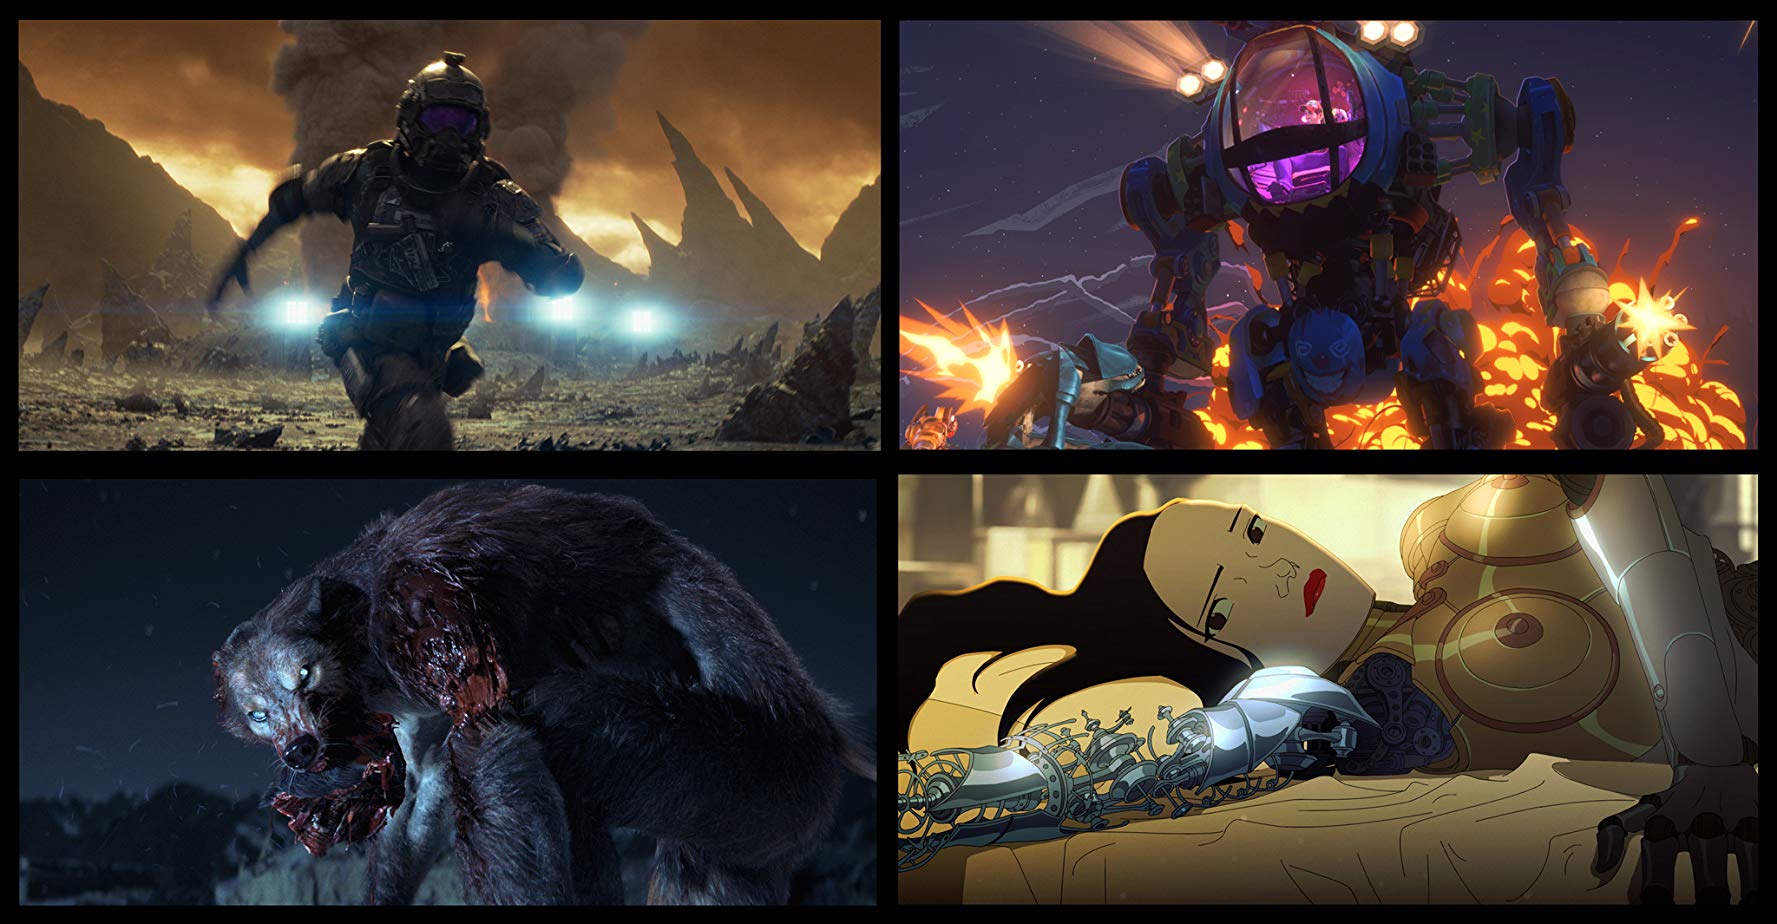 A space ranger flees, a pilot in a mech fires guns from its arms, a werewolf devours flesh, a female android is disassembled.